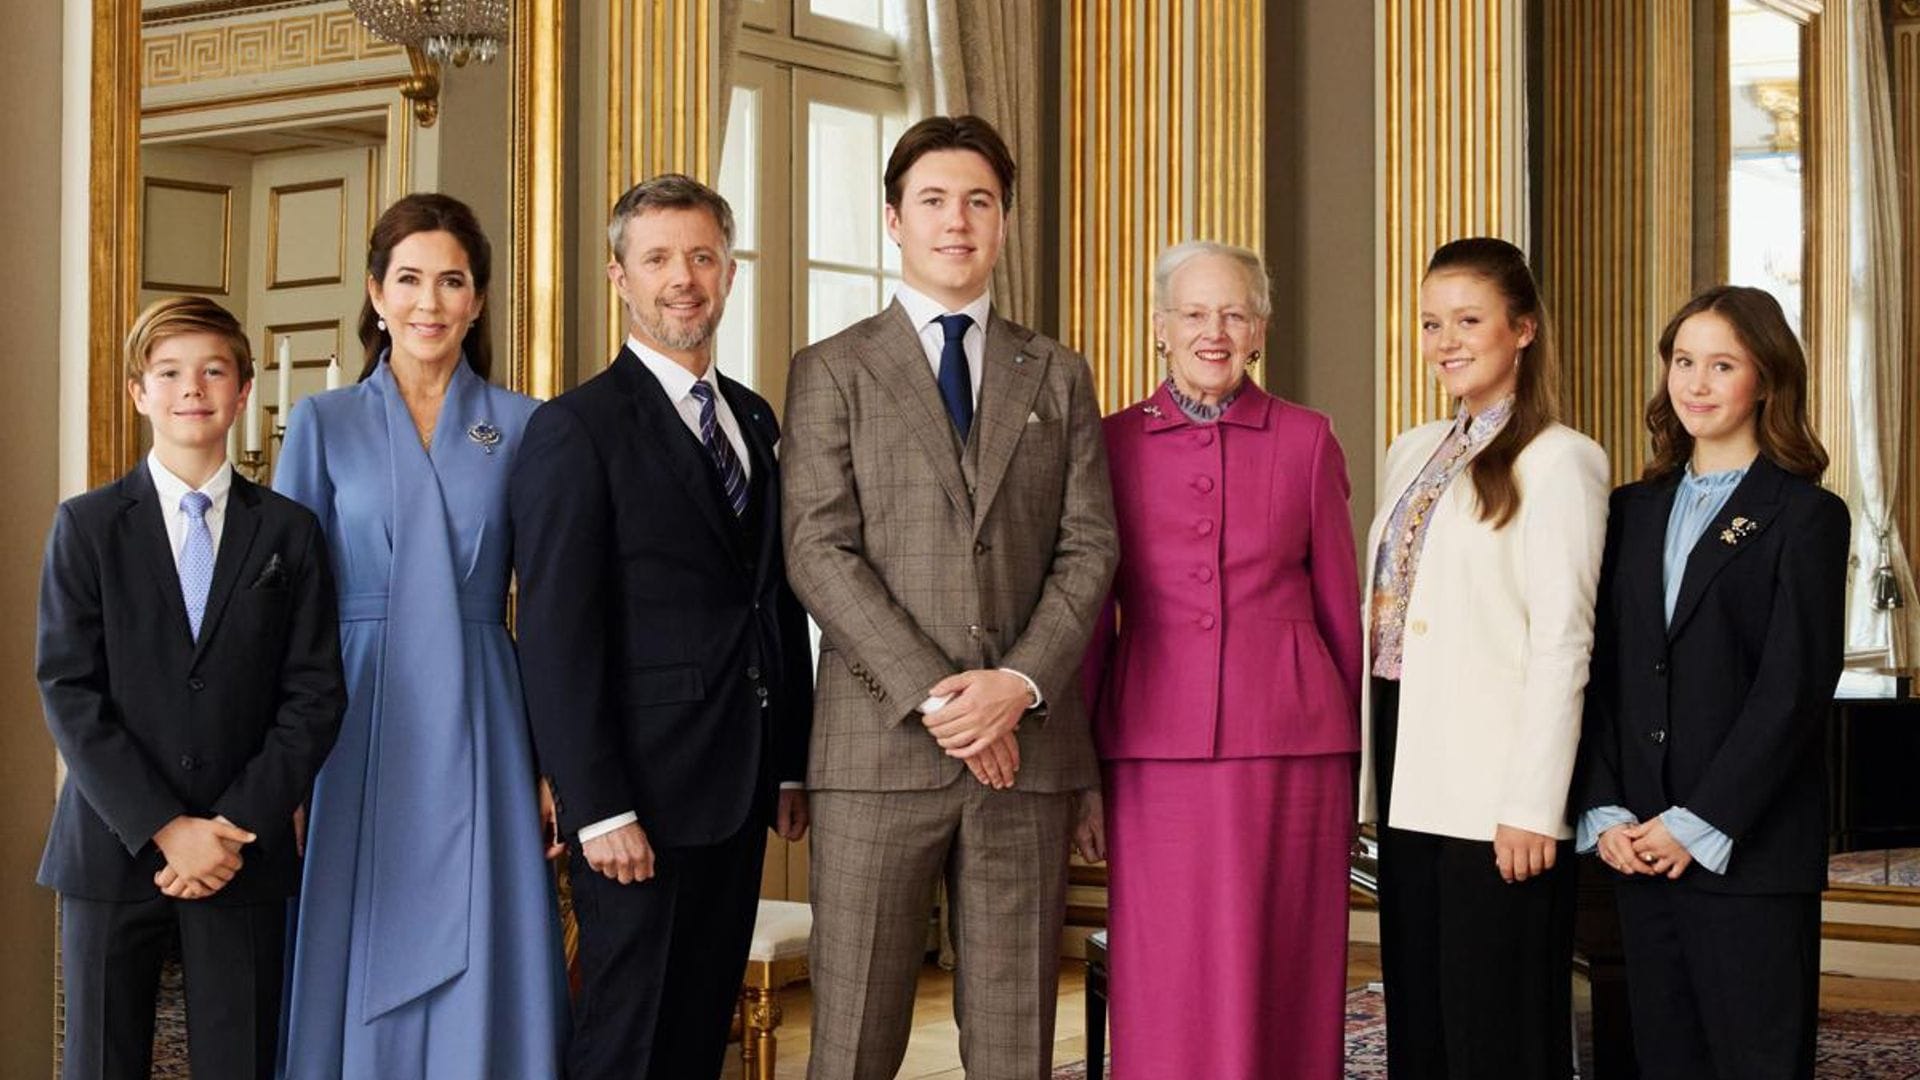 Frederik and Mary will be King and Queen and their son Christian Crown Prince after Queen Margrethe steps down as monarch